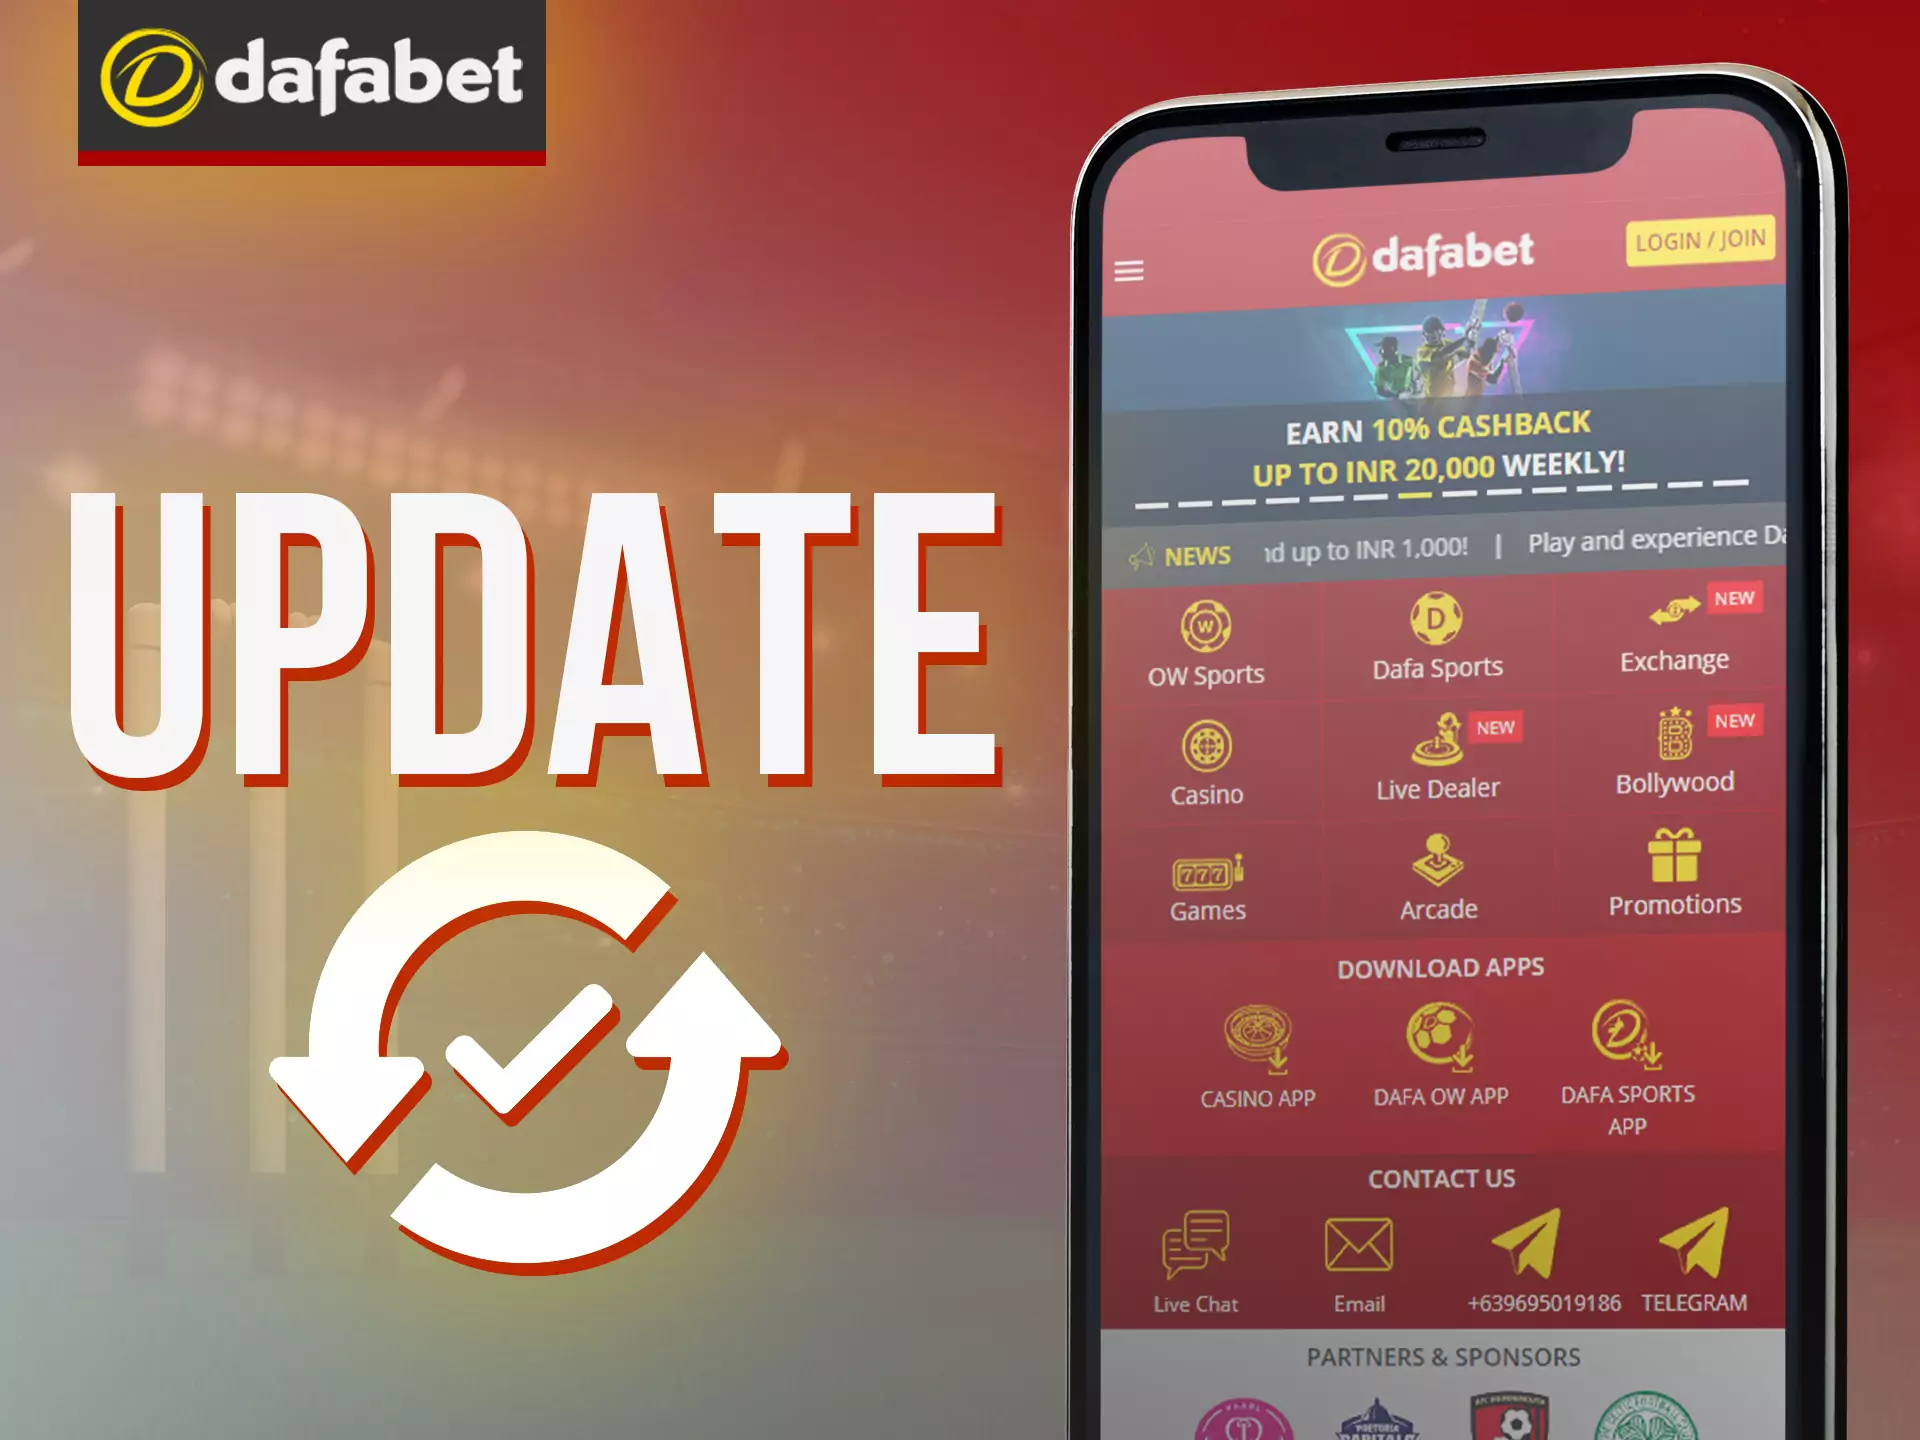 Dafabet app updates automatically when you first log in.